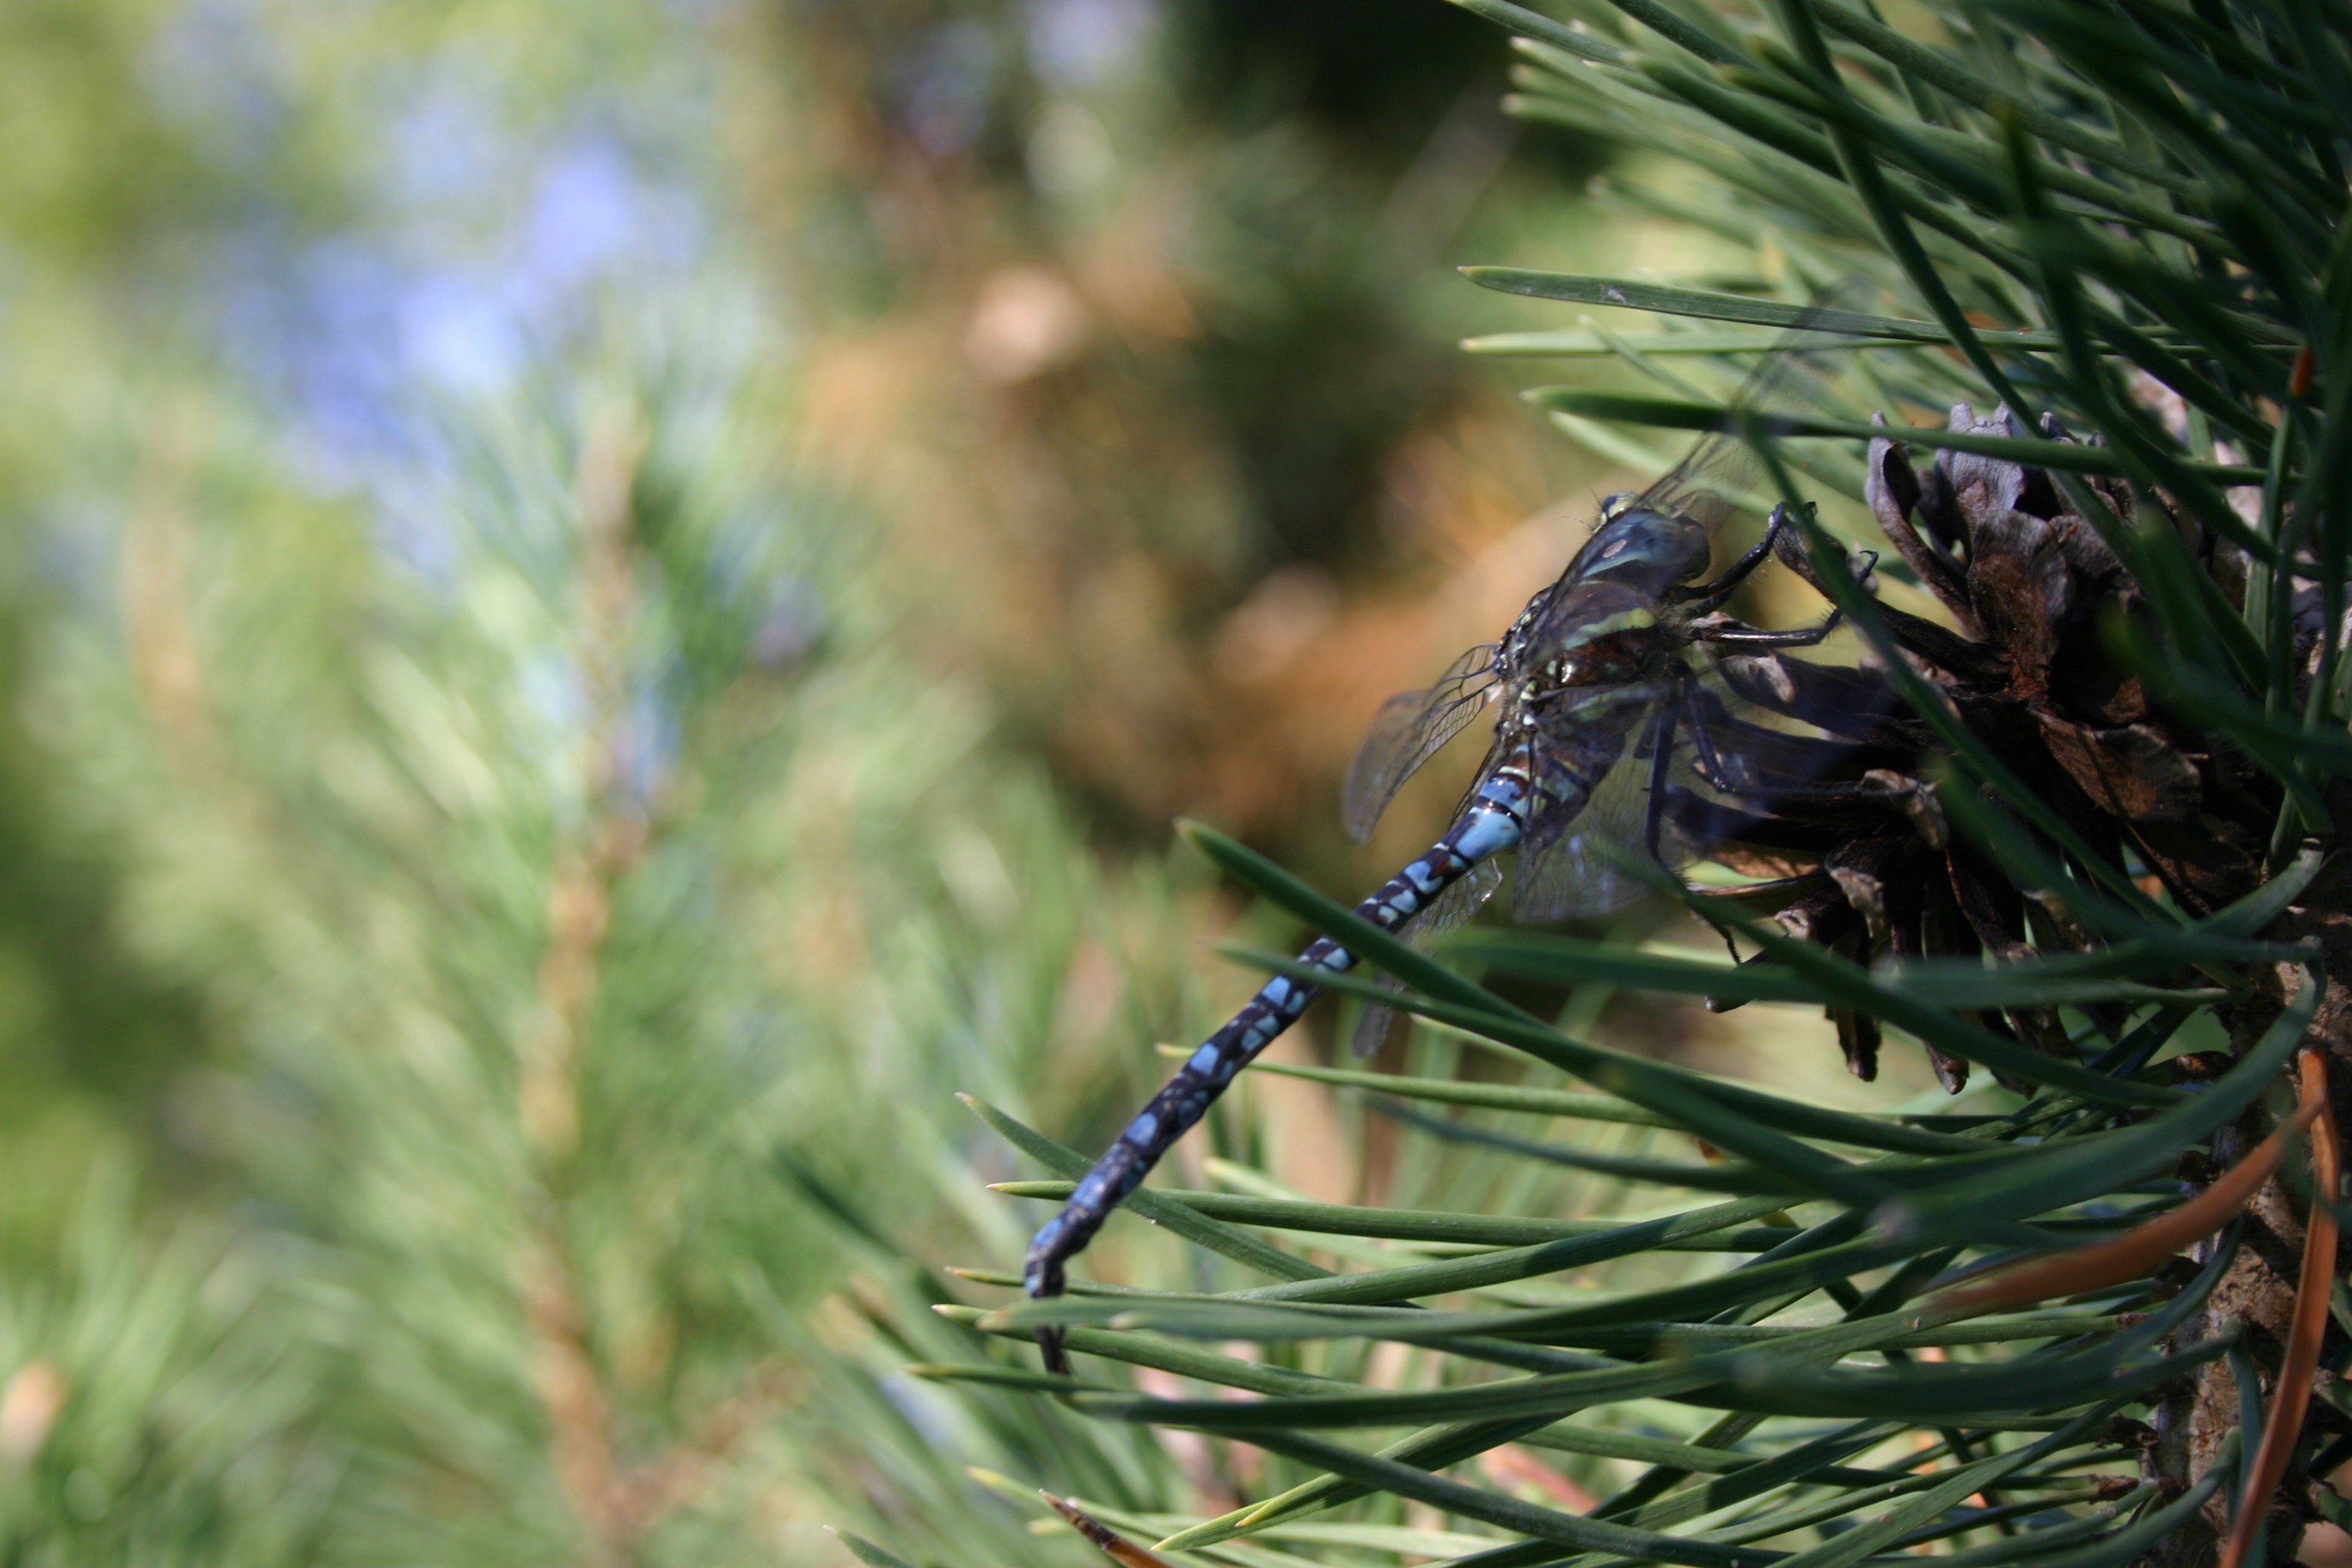 Blue dragonfly on a pine tree.